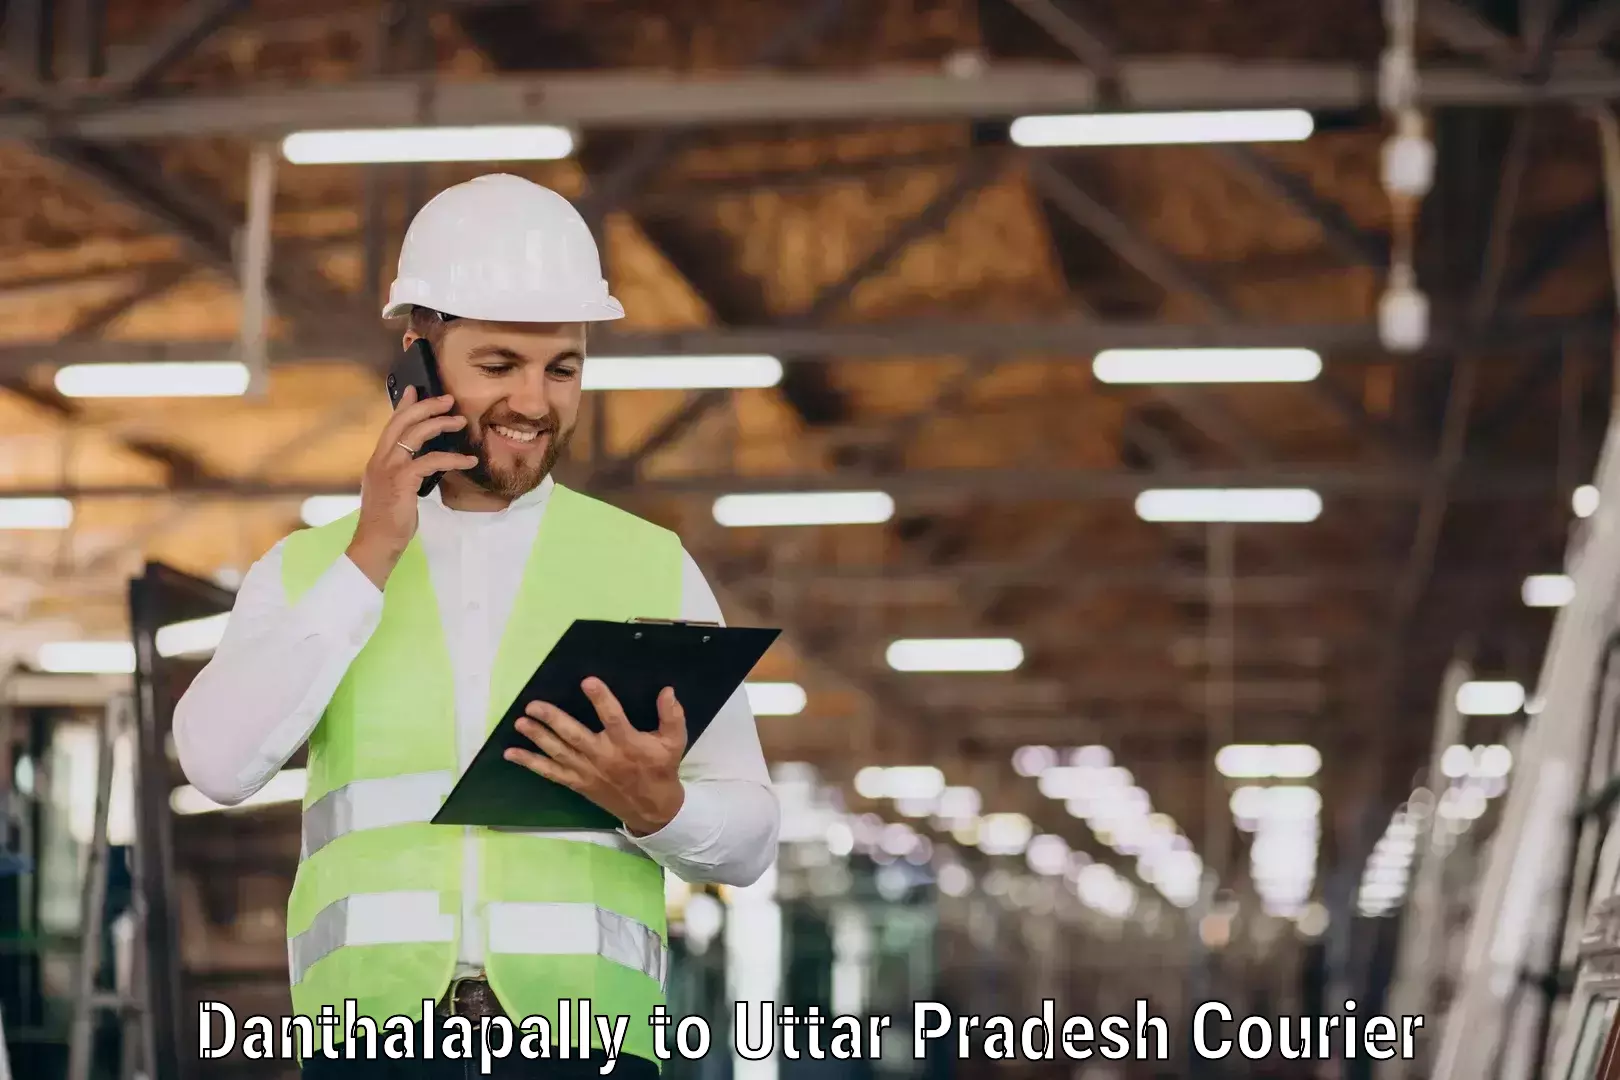 Automated parcel services Danthalapally to Uttar Pradesh